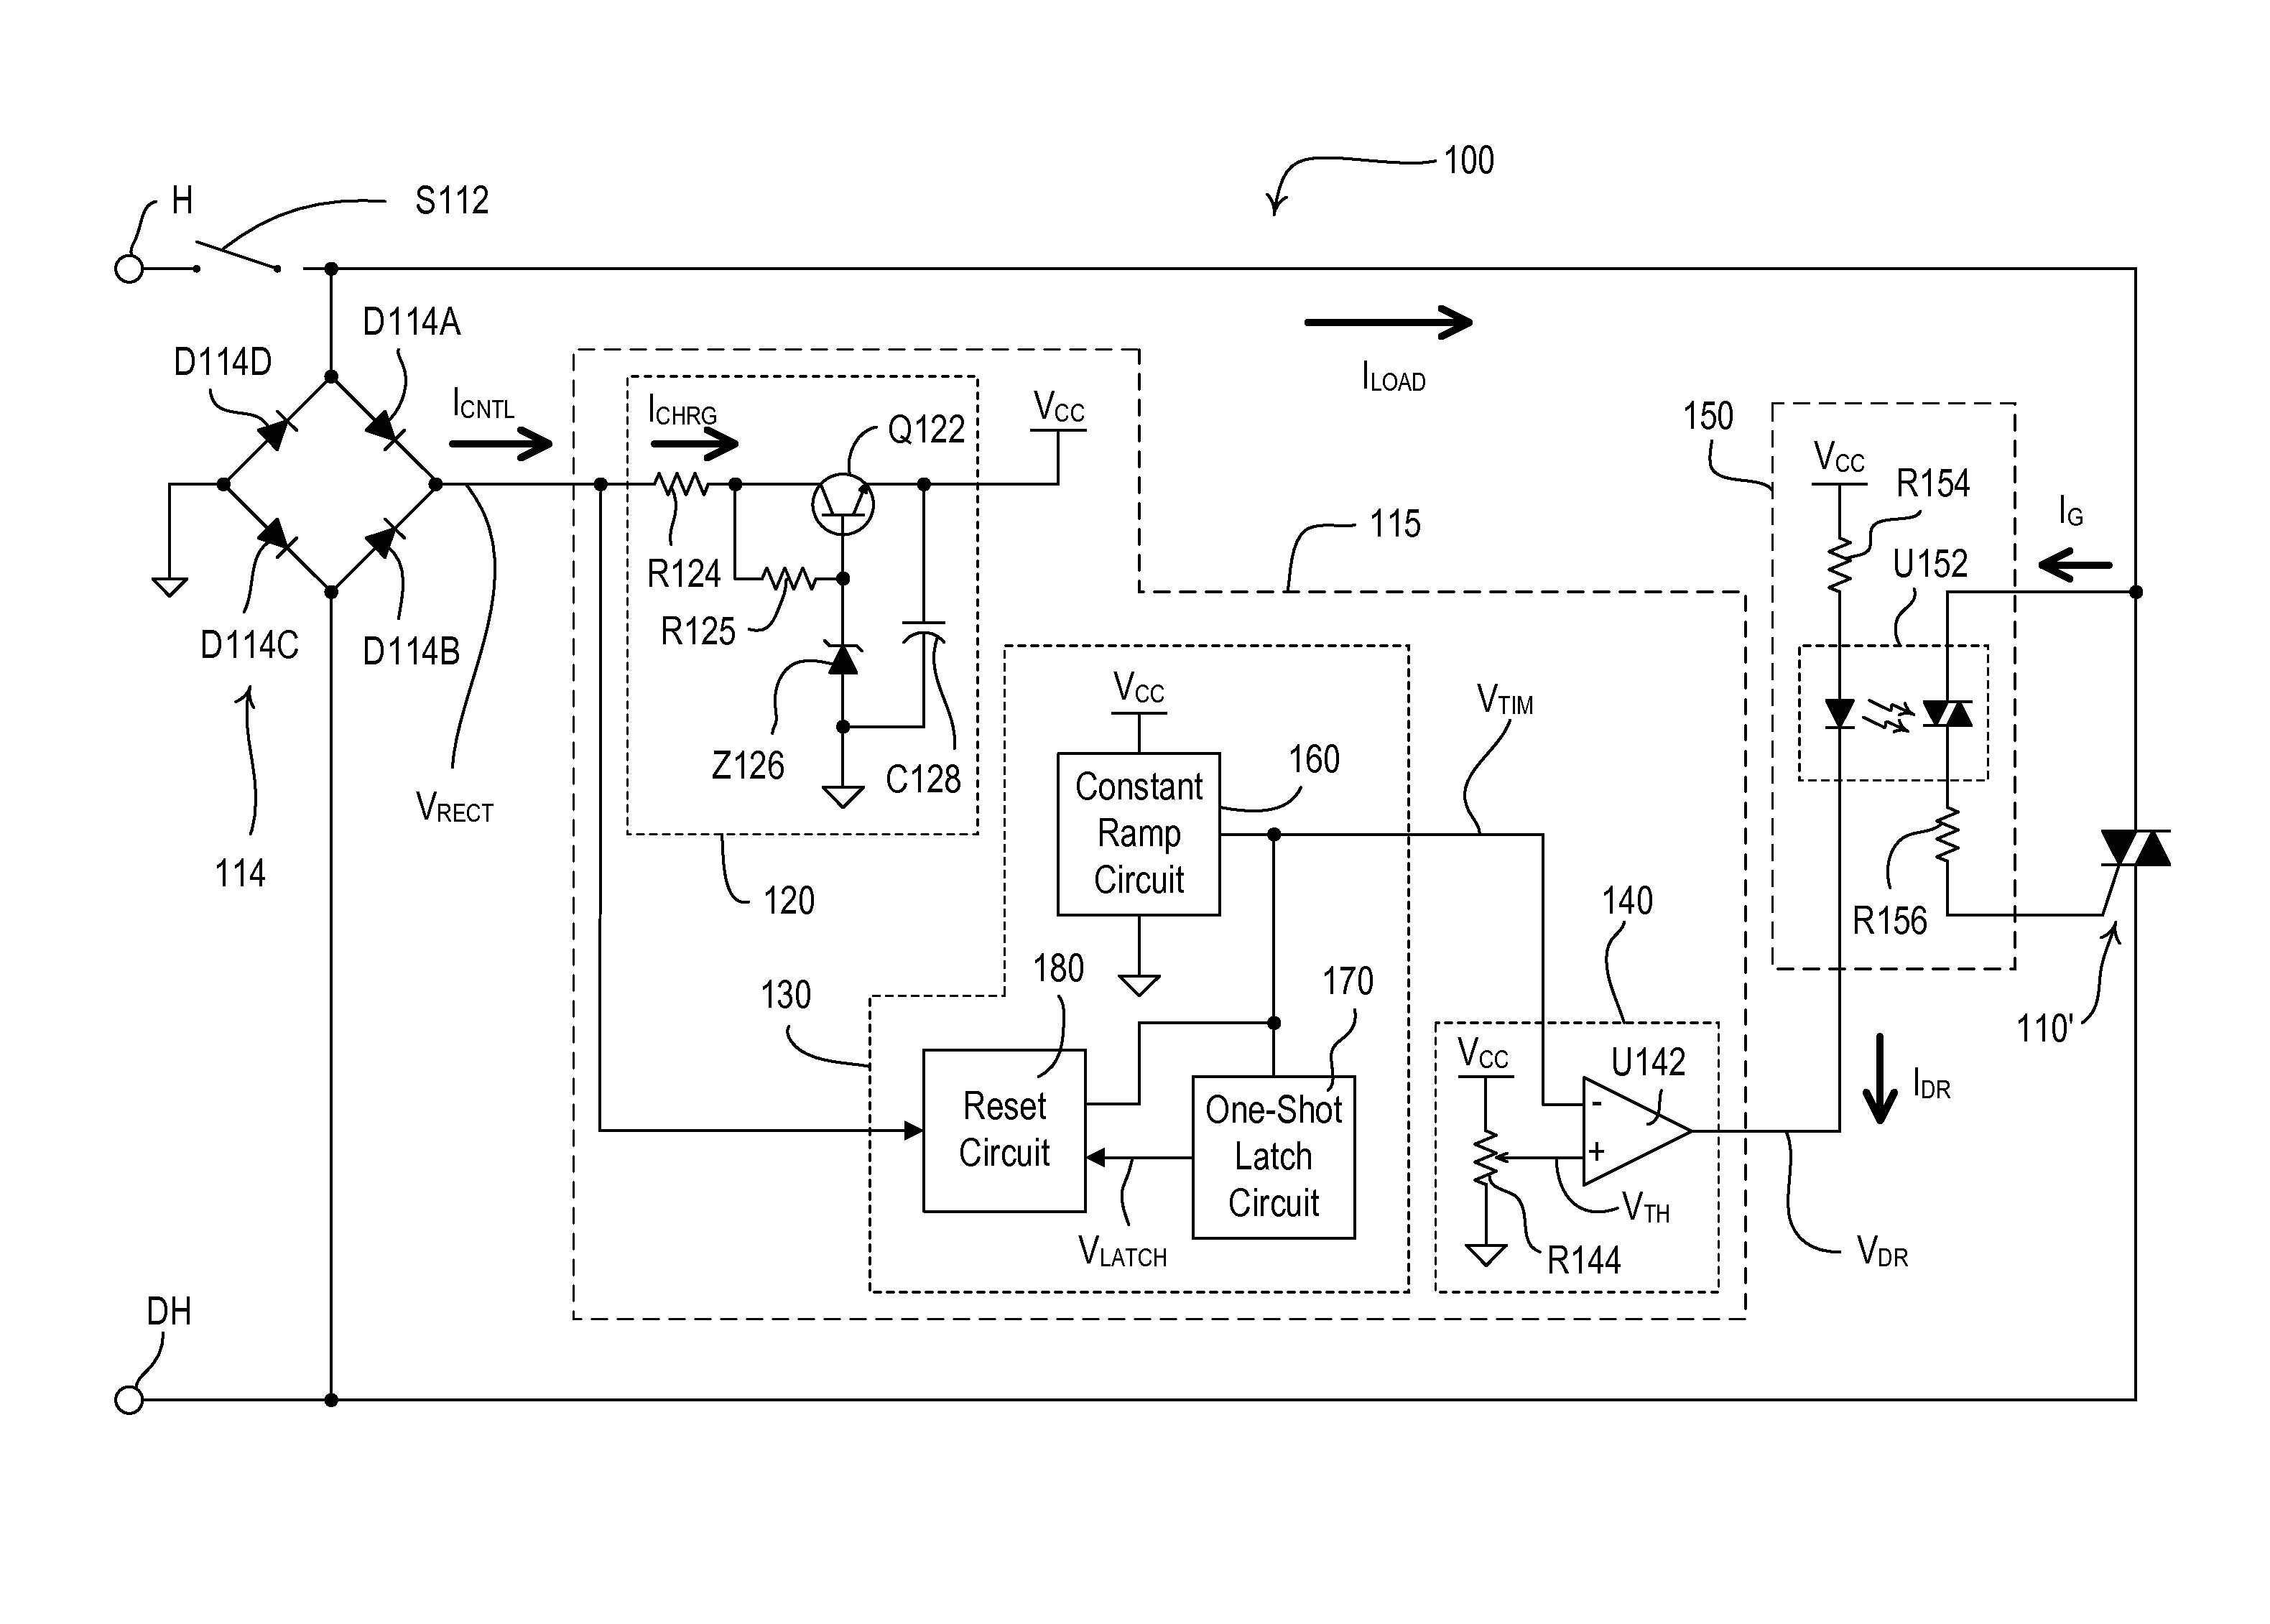 Two-wire load control device for low-power loads